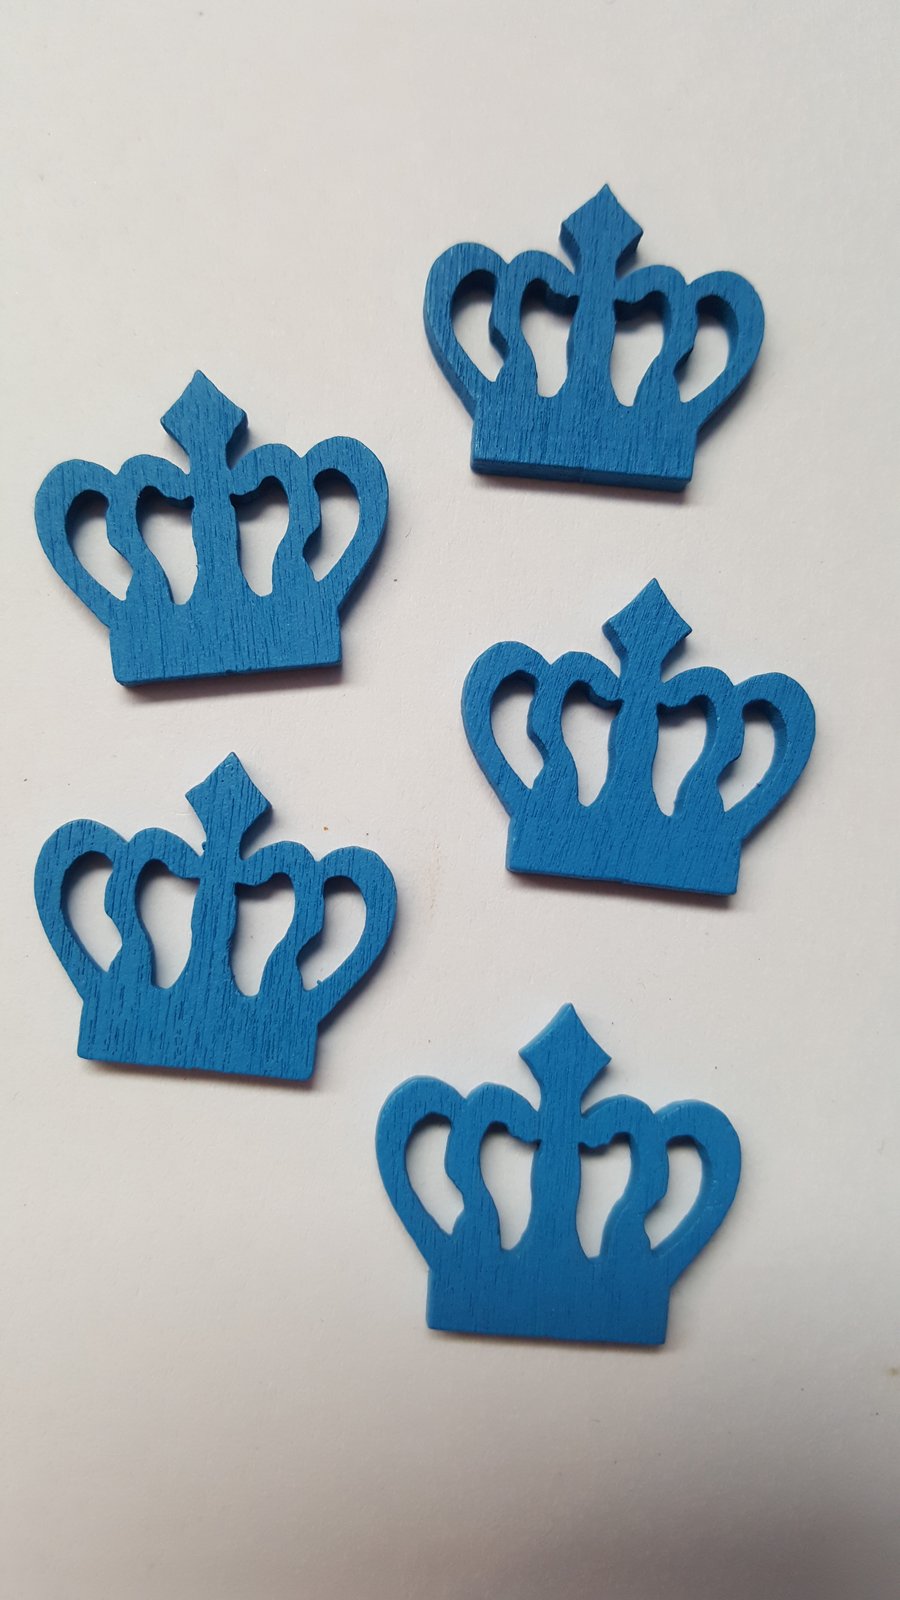 10 x Painted Wooden Shapes - 23mm - Crown - Royal Blue 